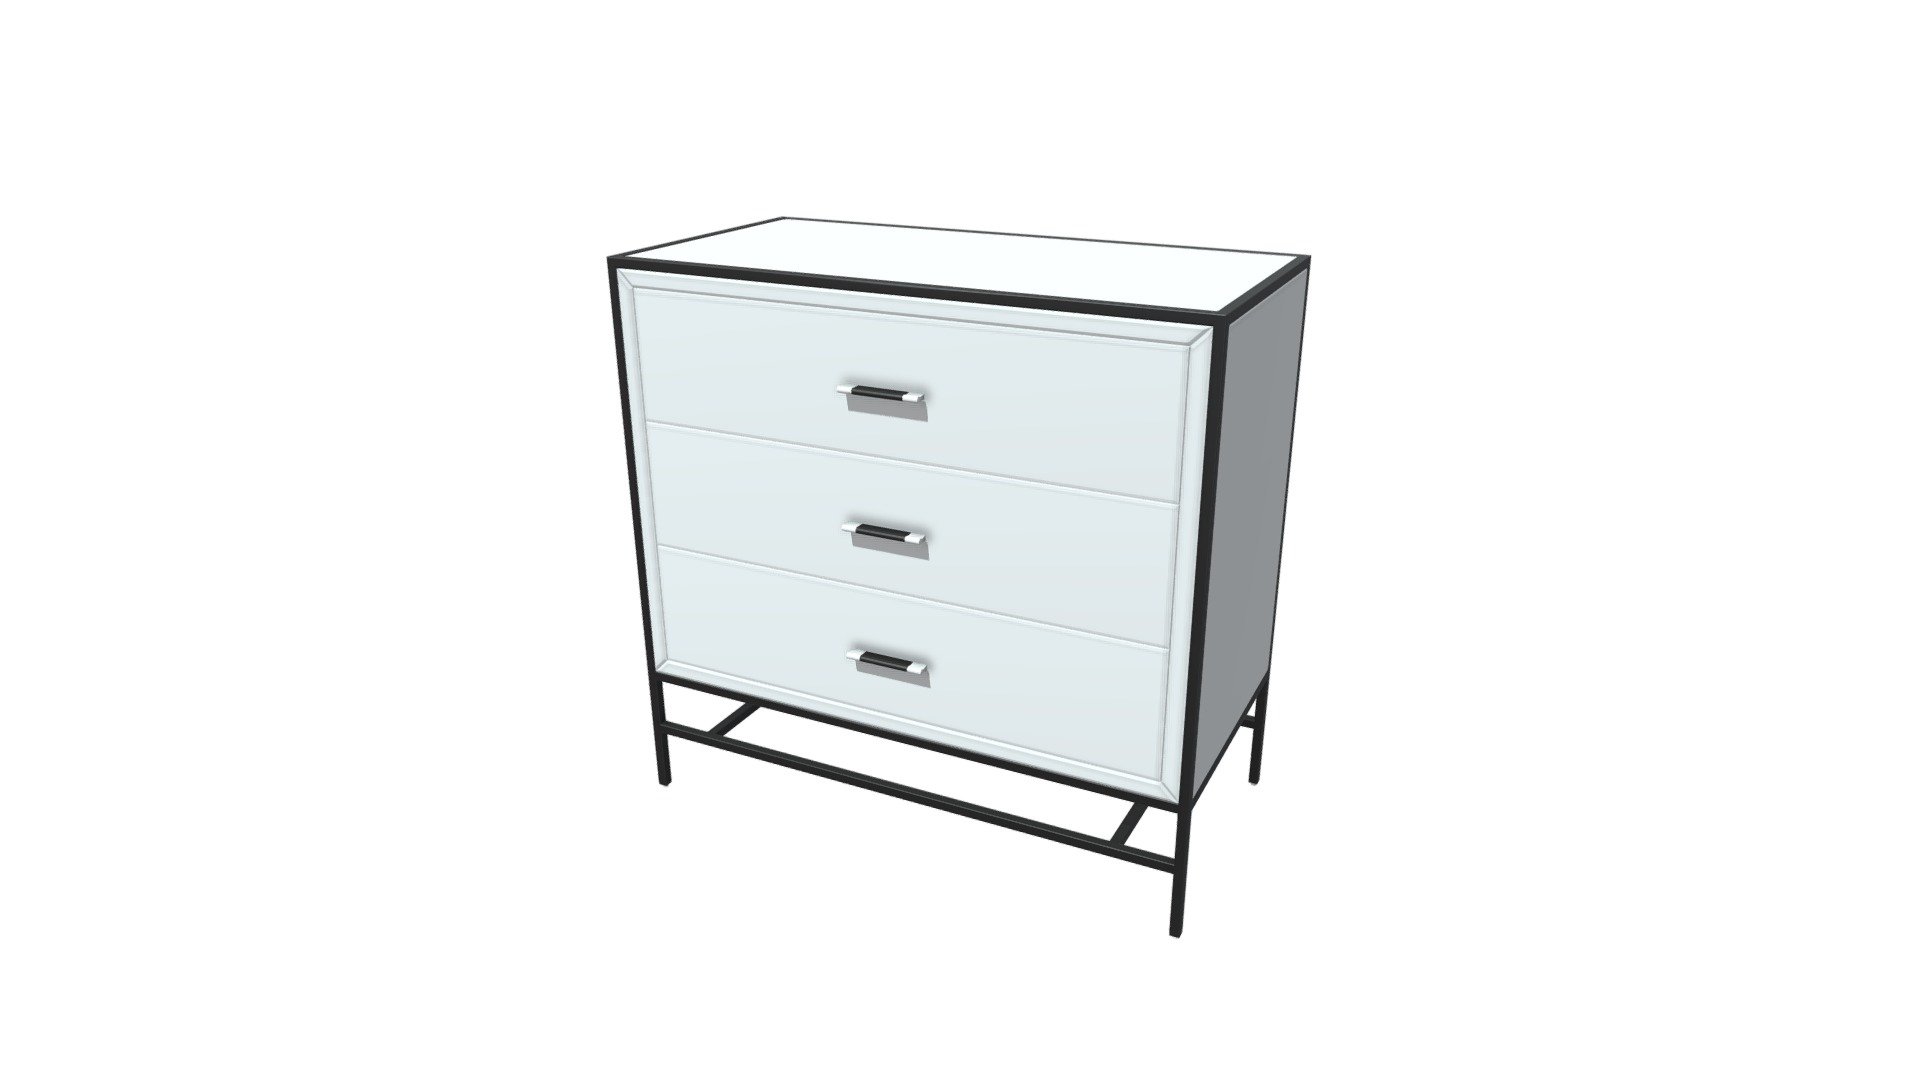 Sophisticated and elegant the Upton Cabinet features three easy to open drawers, a Classic-Modern mirrored design; encased in slim yet sturdy black frame. The perfect addition to living or bedrooms for a chic design statement.  www.zuomod.com/upton-cabinet-mirror-metal - Upton Cabinet Mirror & Metal - 100666 - Buy Royalty Free 3D model by Zuo Modern (@zuo) 3d model